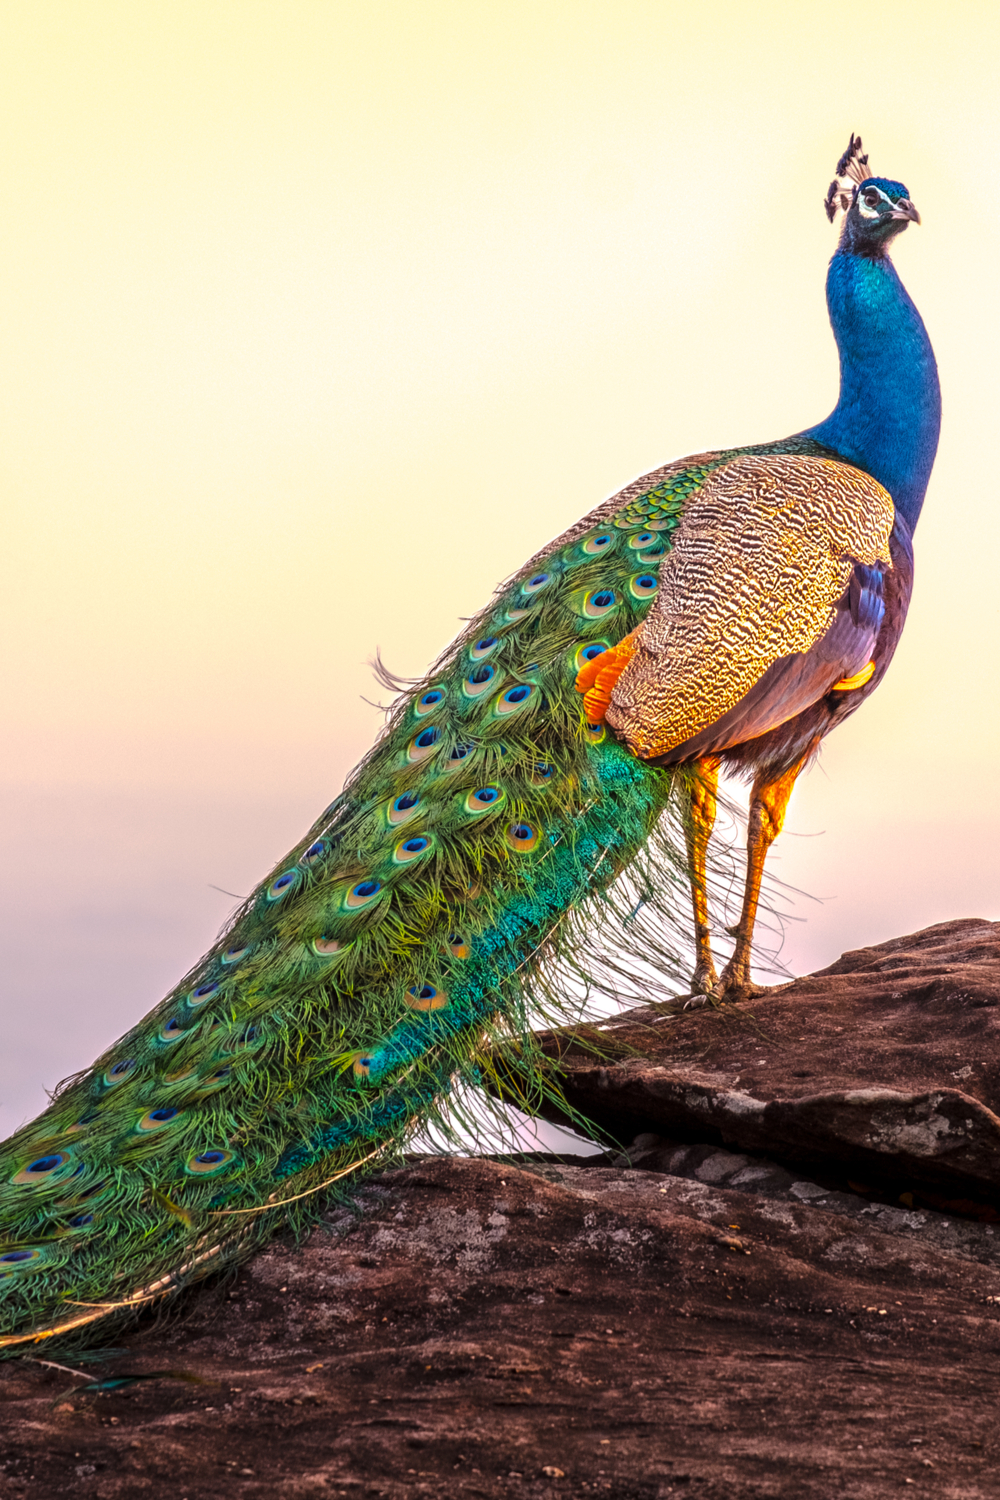 The Peacock in Astrology